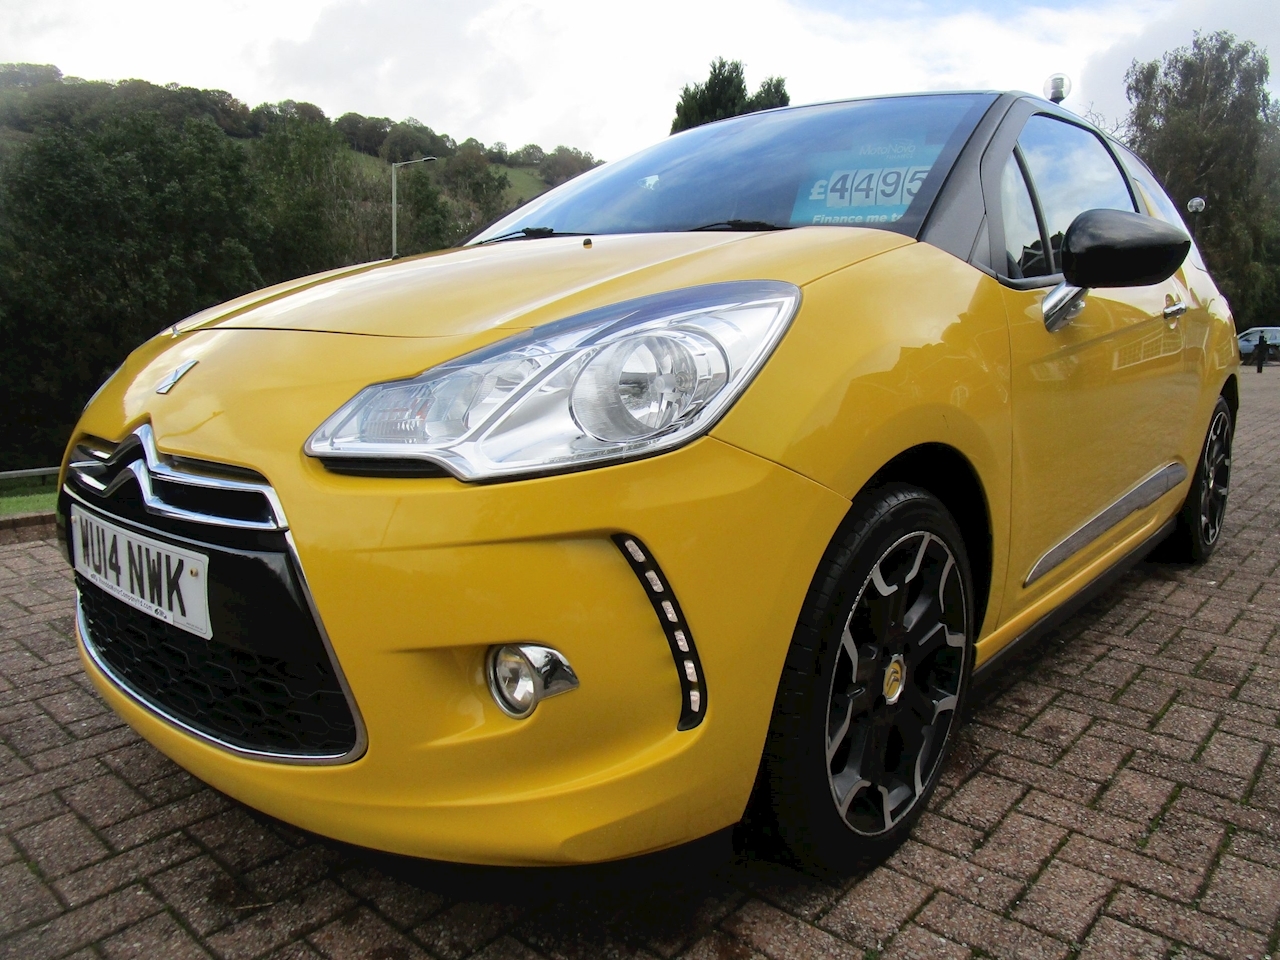 Ds3 E-Hdi Dstyle Plus Hatchback 1.6 Manual Diesel